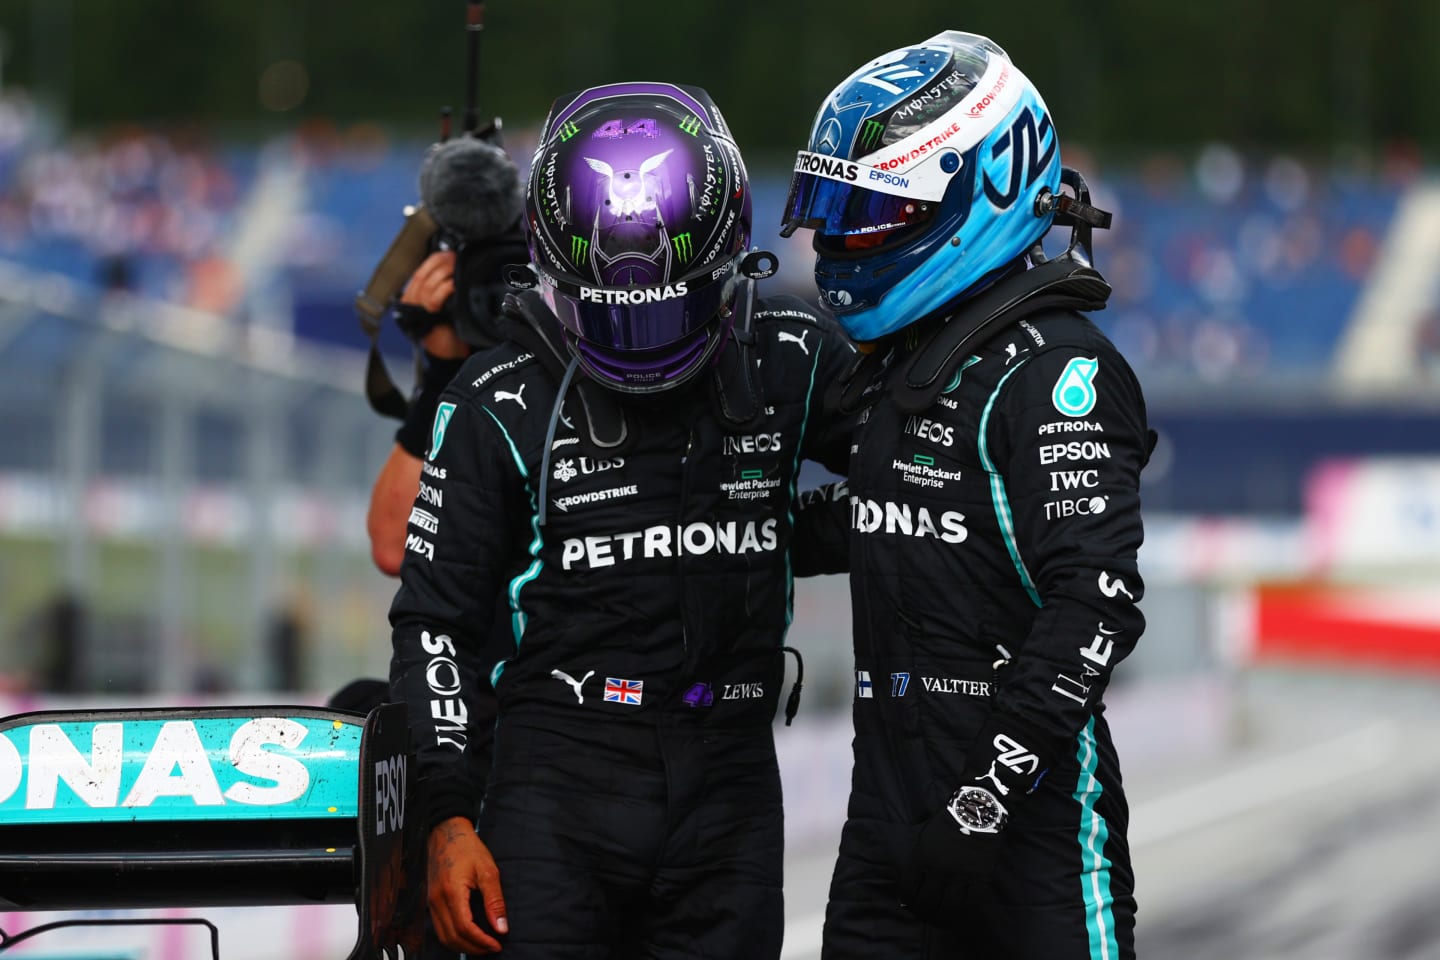 SPIELBERG, AUSTRIA - JUNE 27: Second placed Lewis Hamilton of Great Britain and Mercedes GP and third placed Valtteri Bottas of Finland and Mercedes GP hug in parc ferme during the F1 Grand Prix of Styria at Red Bull Ring on June 27, 2021 in Spielberg, Austria. (Photo by Dan Istitene - Formula 1/Formula 1 via Getty Images)